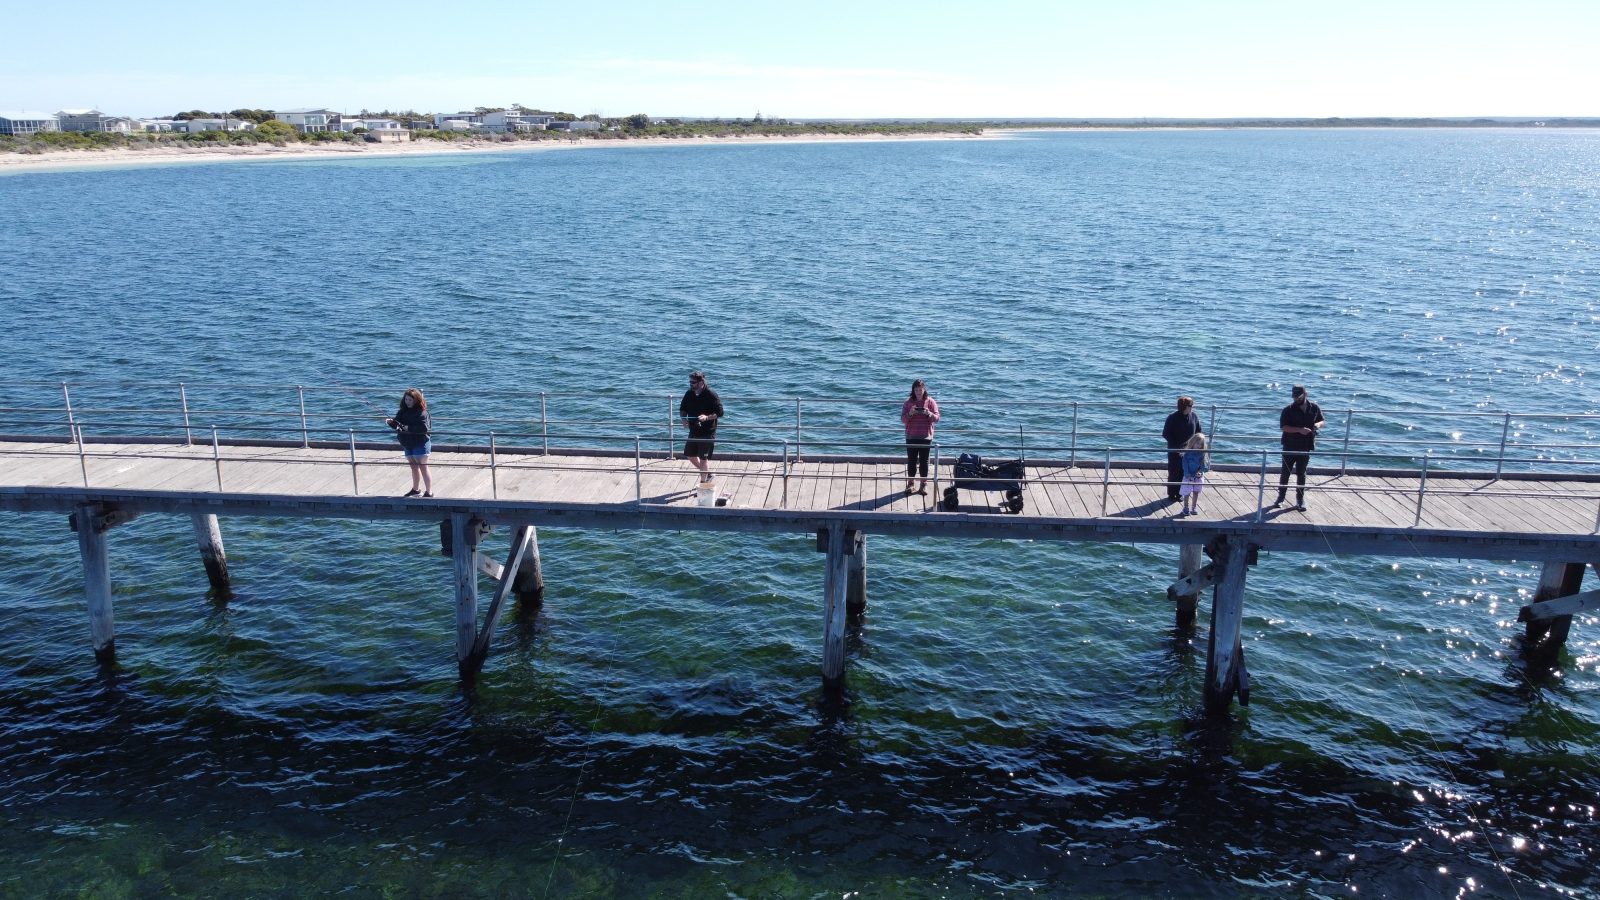 Fishing on the jetty